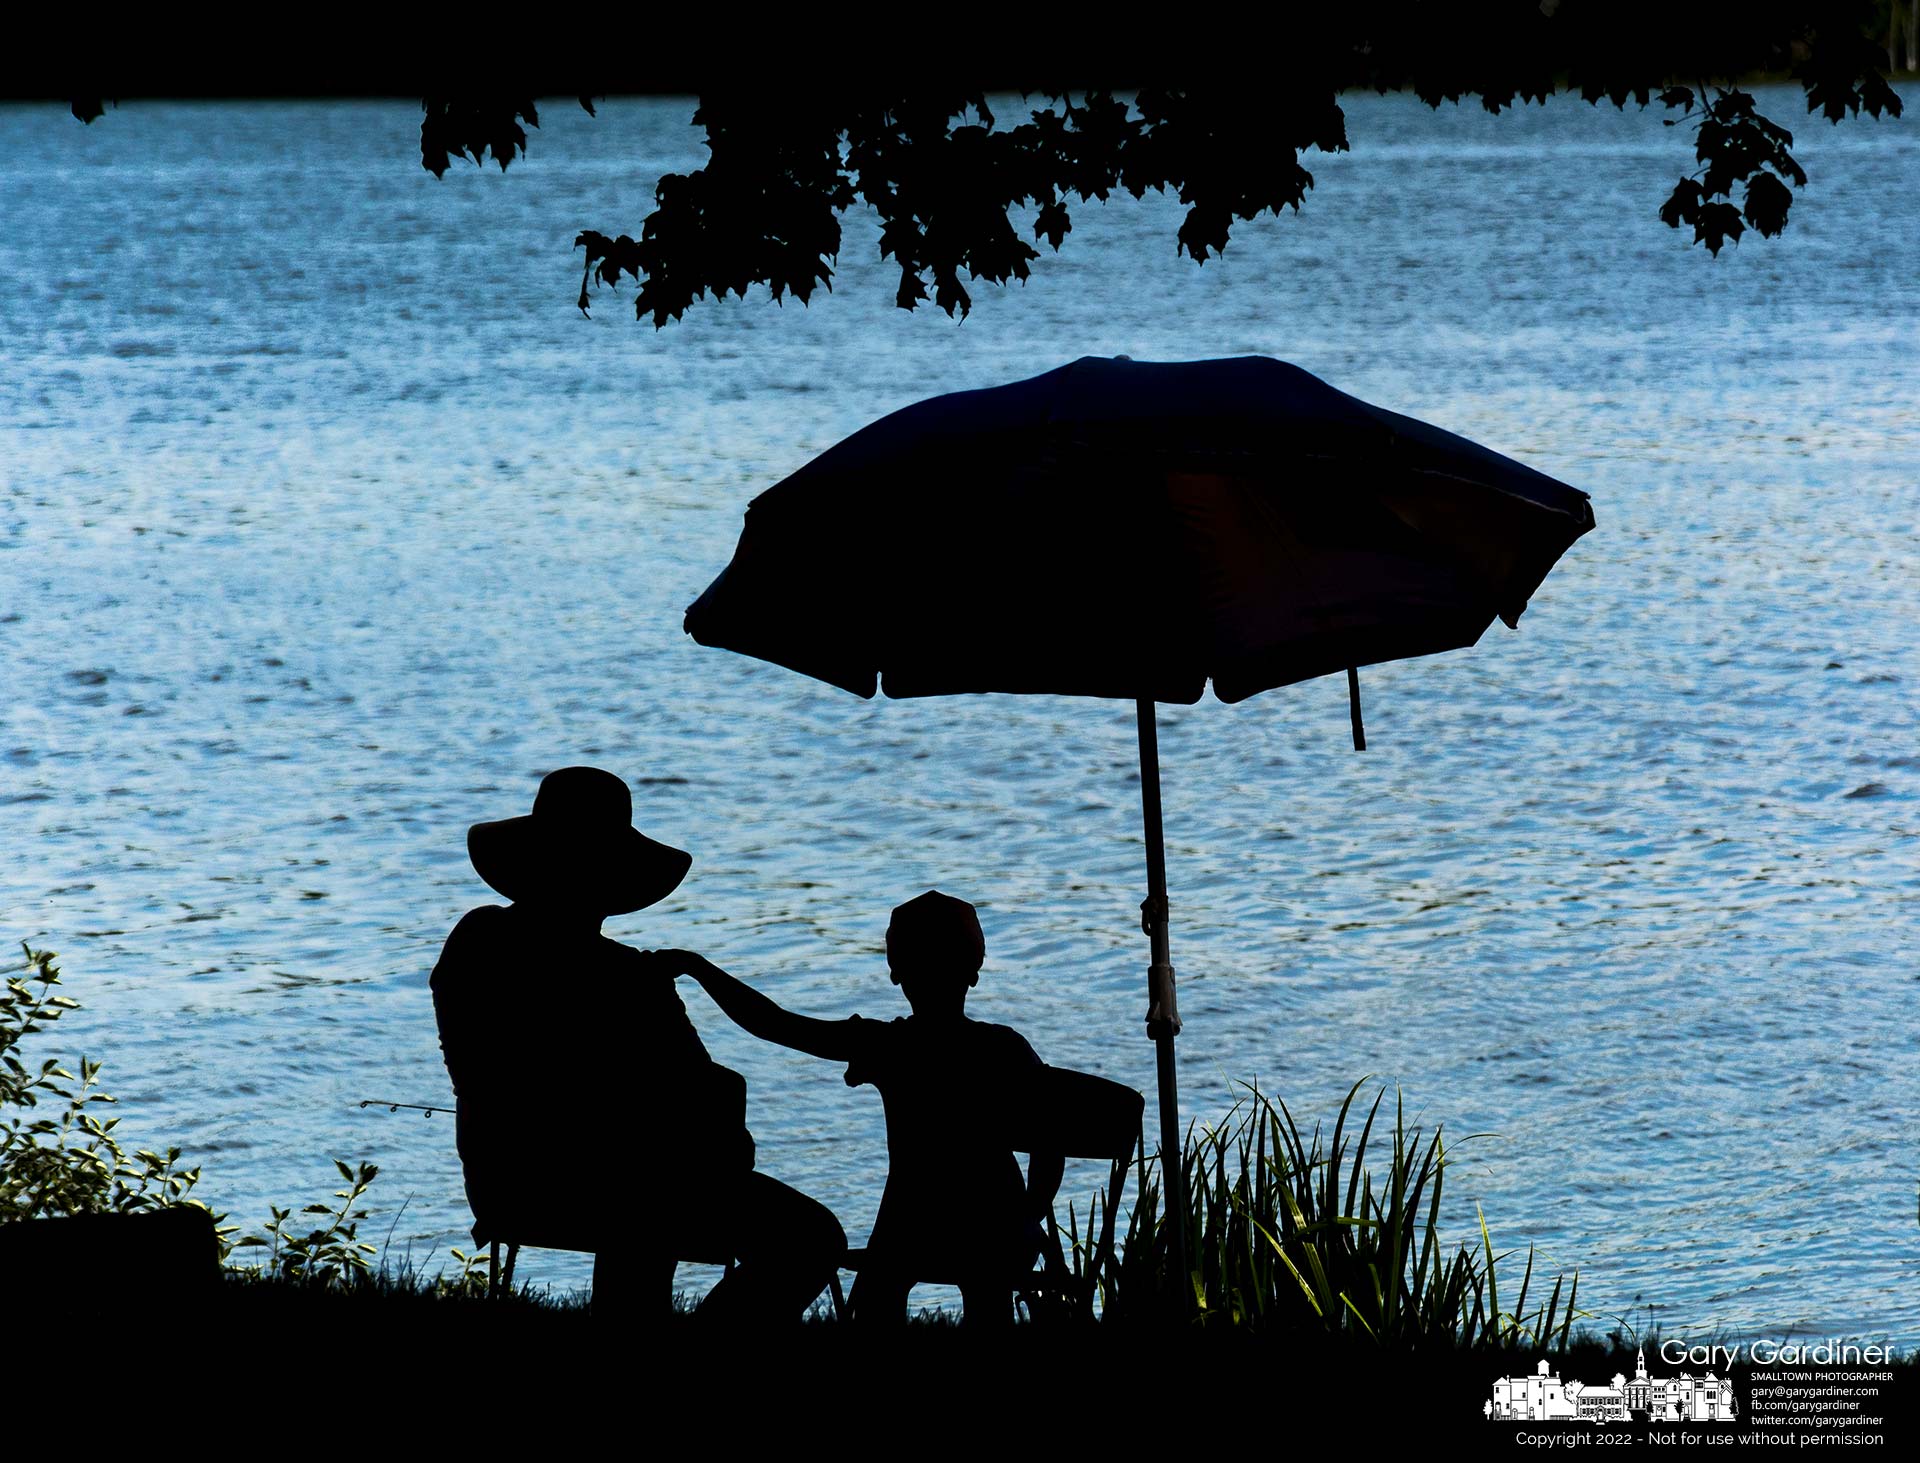 A young boy places his hand on his father's shoulder as they watch their fishing lines tossed into Hoover Reservoir from the shoreline at Red Bank Park. My Final Photo for July 30, 2022.